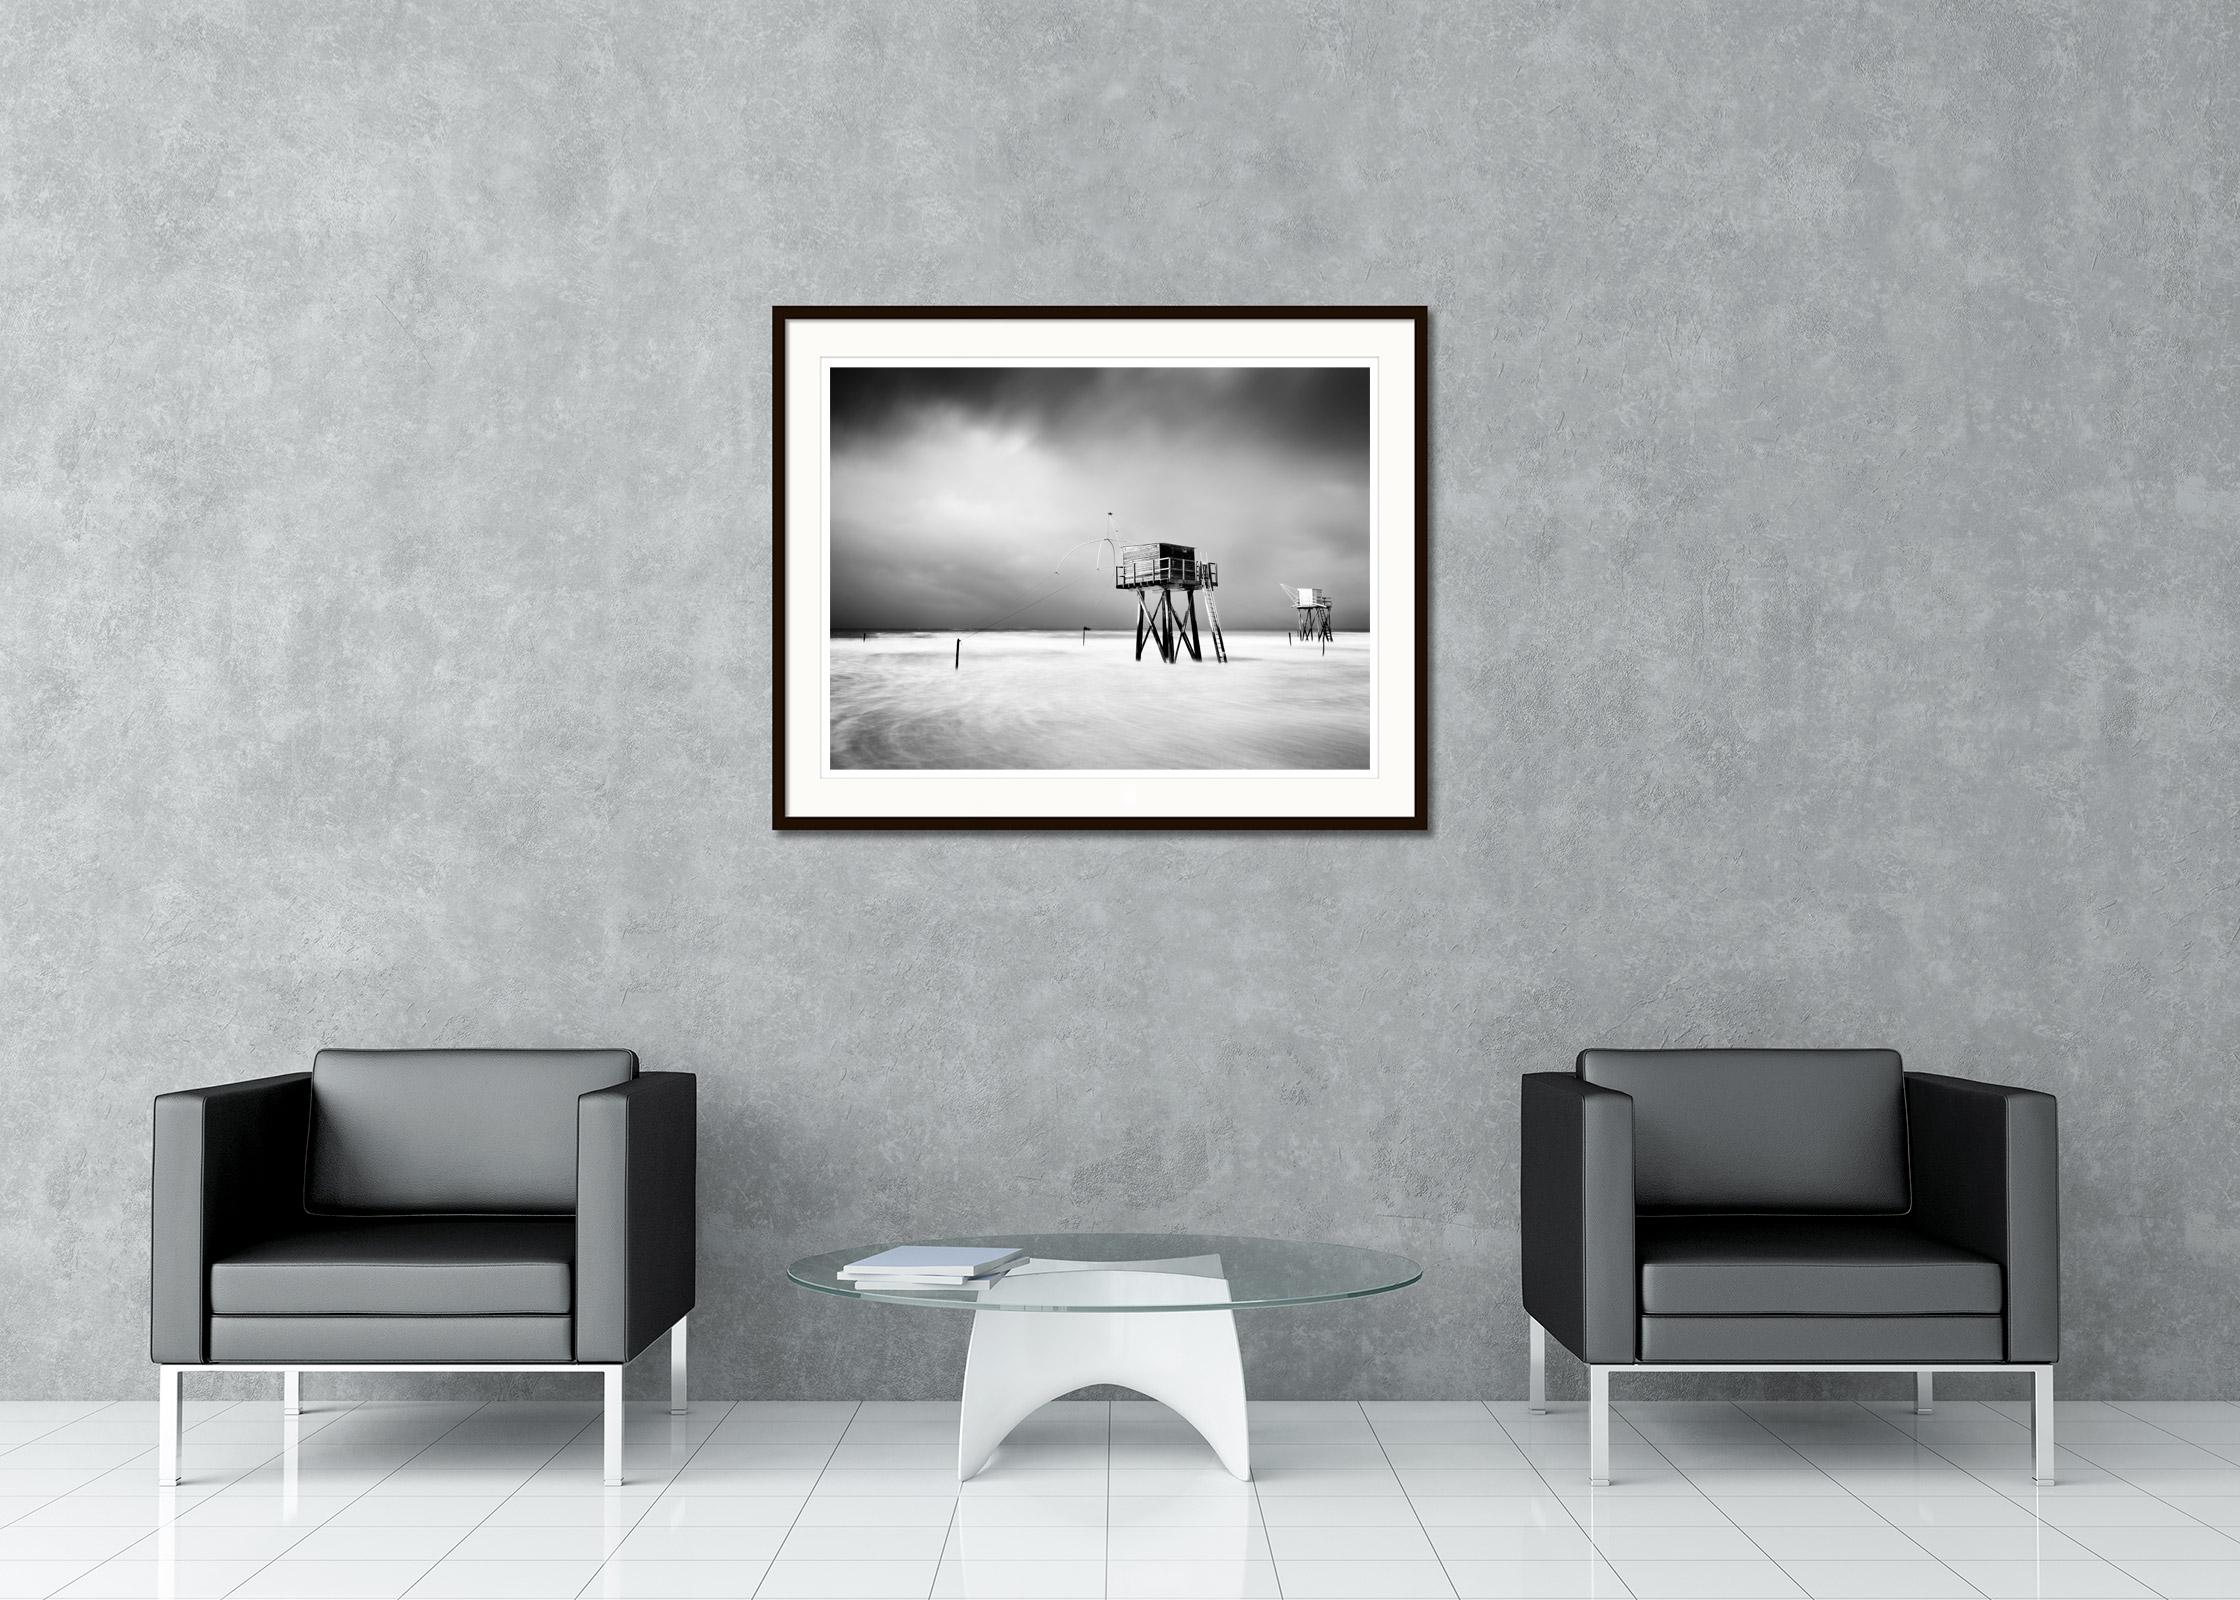 Black and white fine art long exposure waterscape - landscape photography print. Fishermen's huts on stilts in the surf of the Atlantic coast of France. Archival pigment ink print, edition of 7. Signed, titled, dated and numbered by artist.